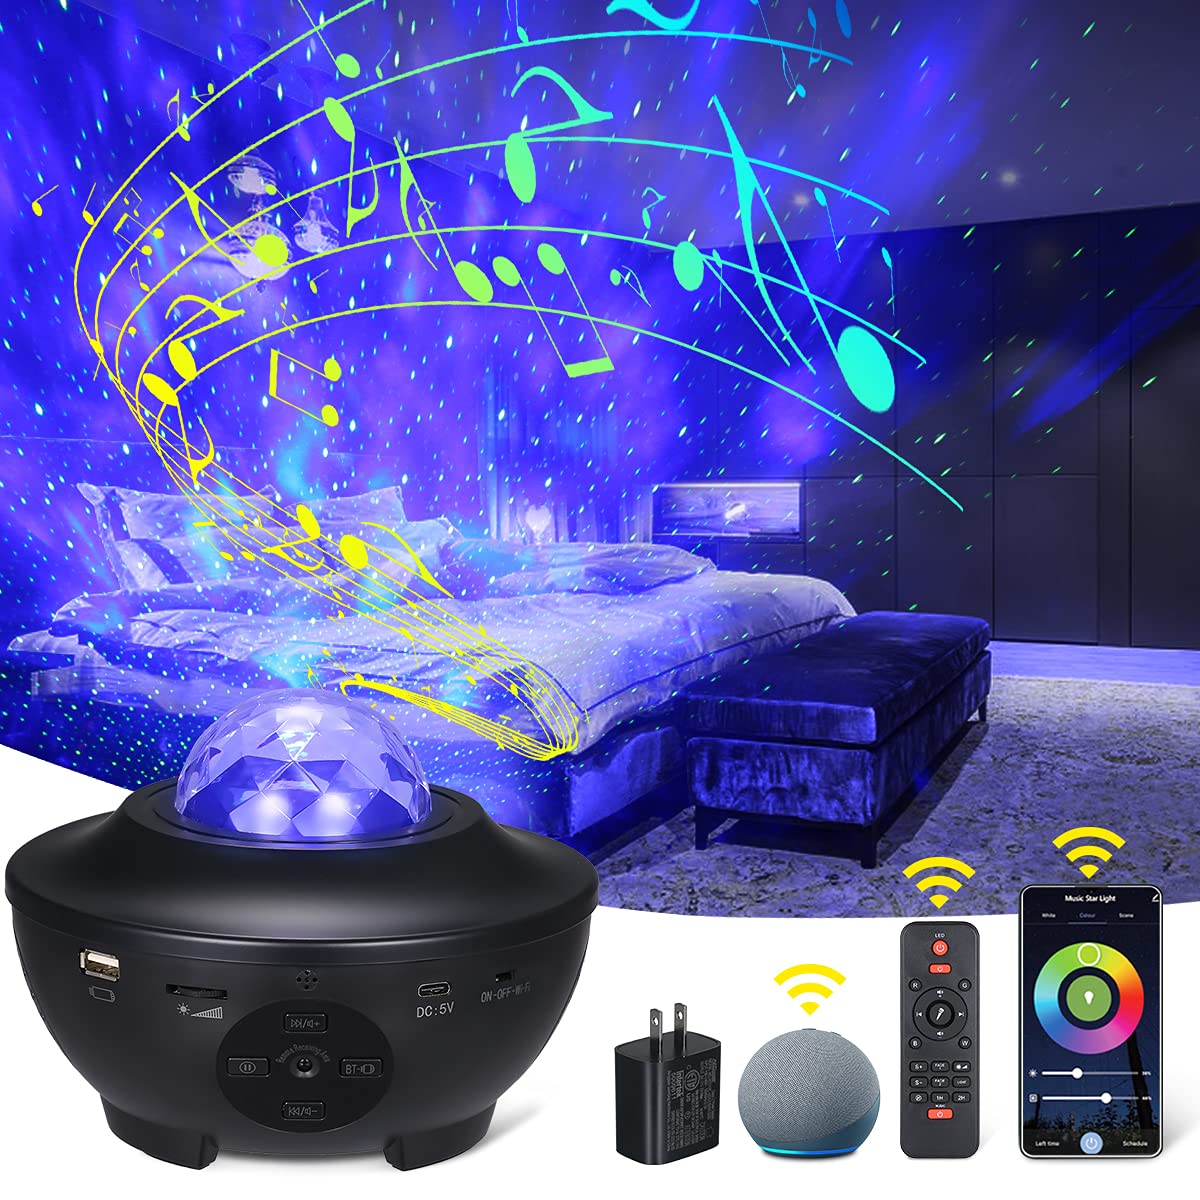 Smart Star Projector Night Light,Tom-shine WiFi Galaxy Projector Light Bluetooth Music Speaker Ocean Wave Nebula Cloud Works with Alexa Google Home,Gifts for Baby Kids Bedroom Decor Christmas Party